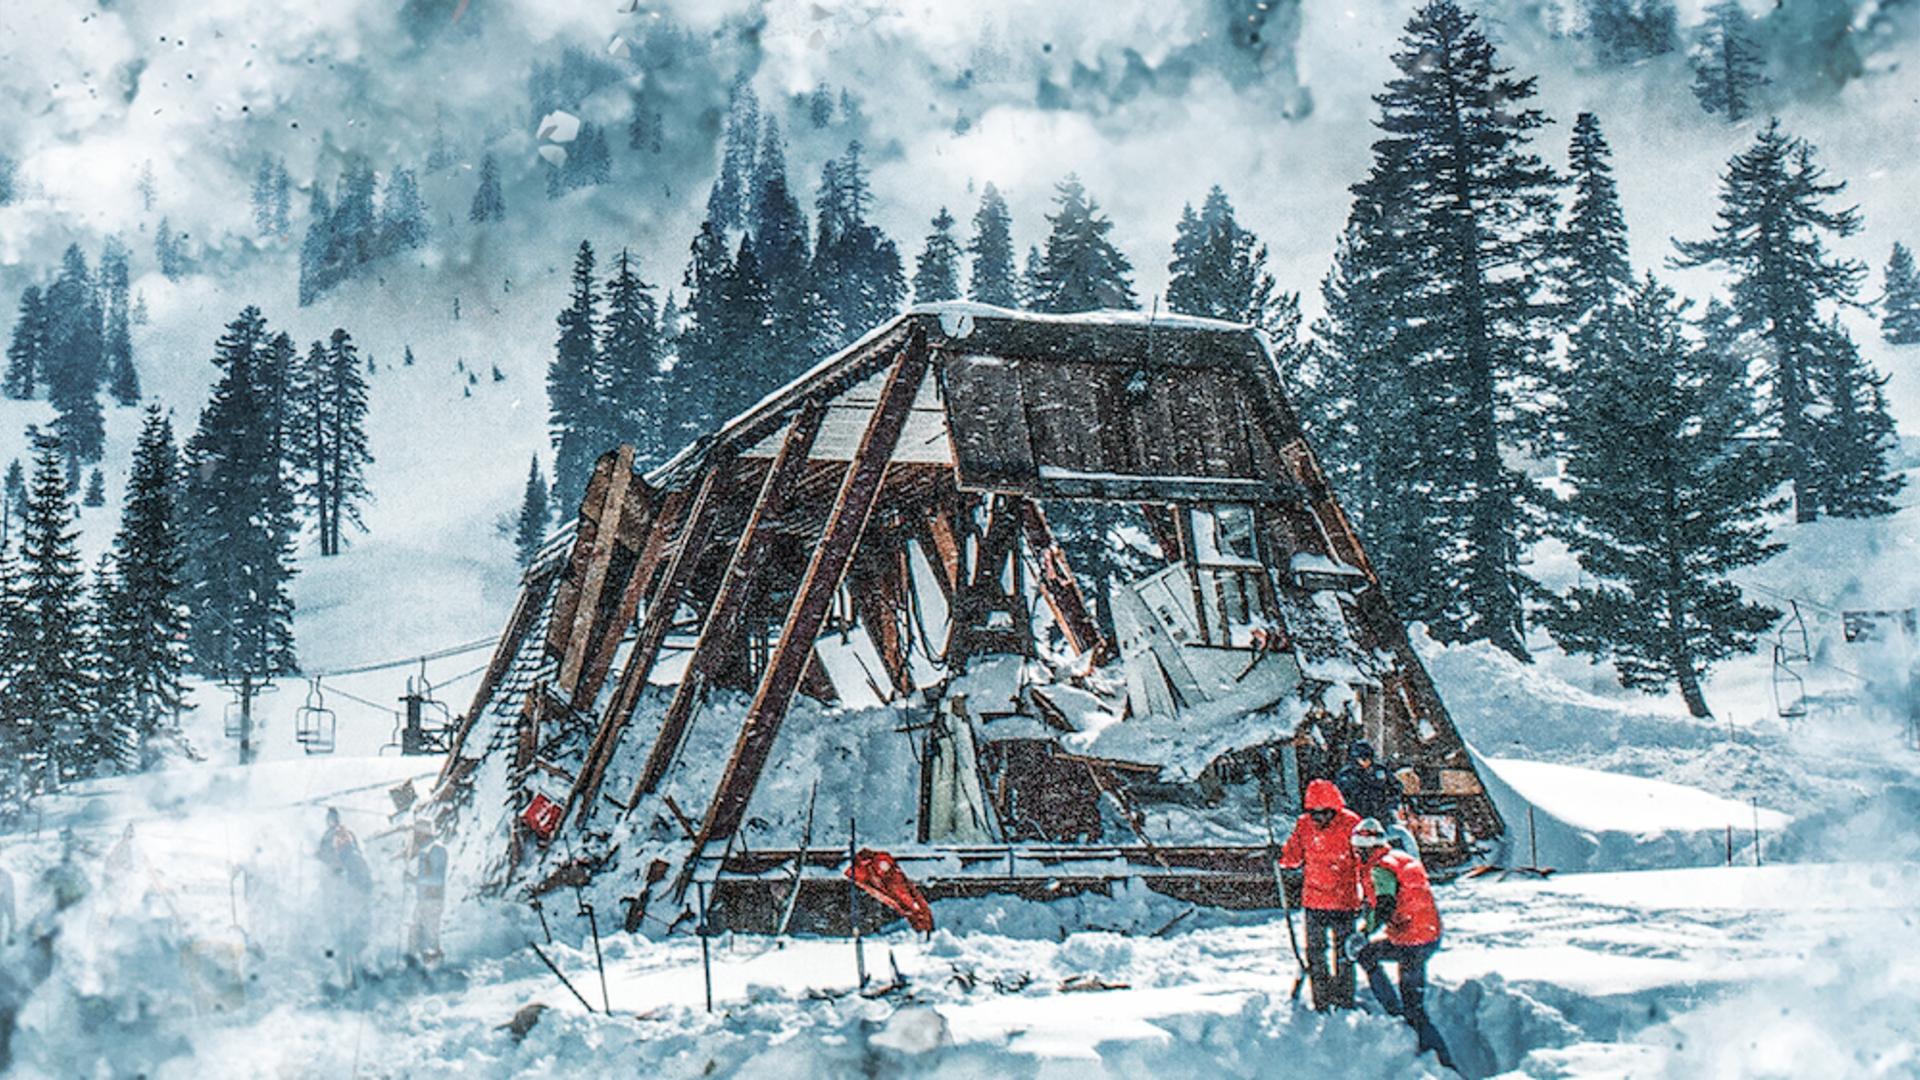 Breathtaking Film Reveals Heart-Wrenching Story of Buried: The 1982 Alpine Meadows Avalanche (2021) 14